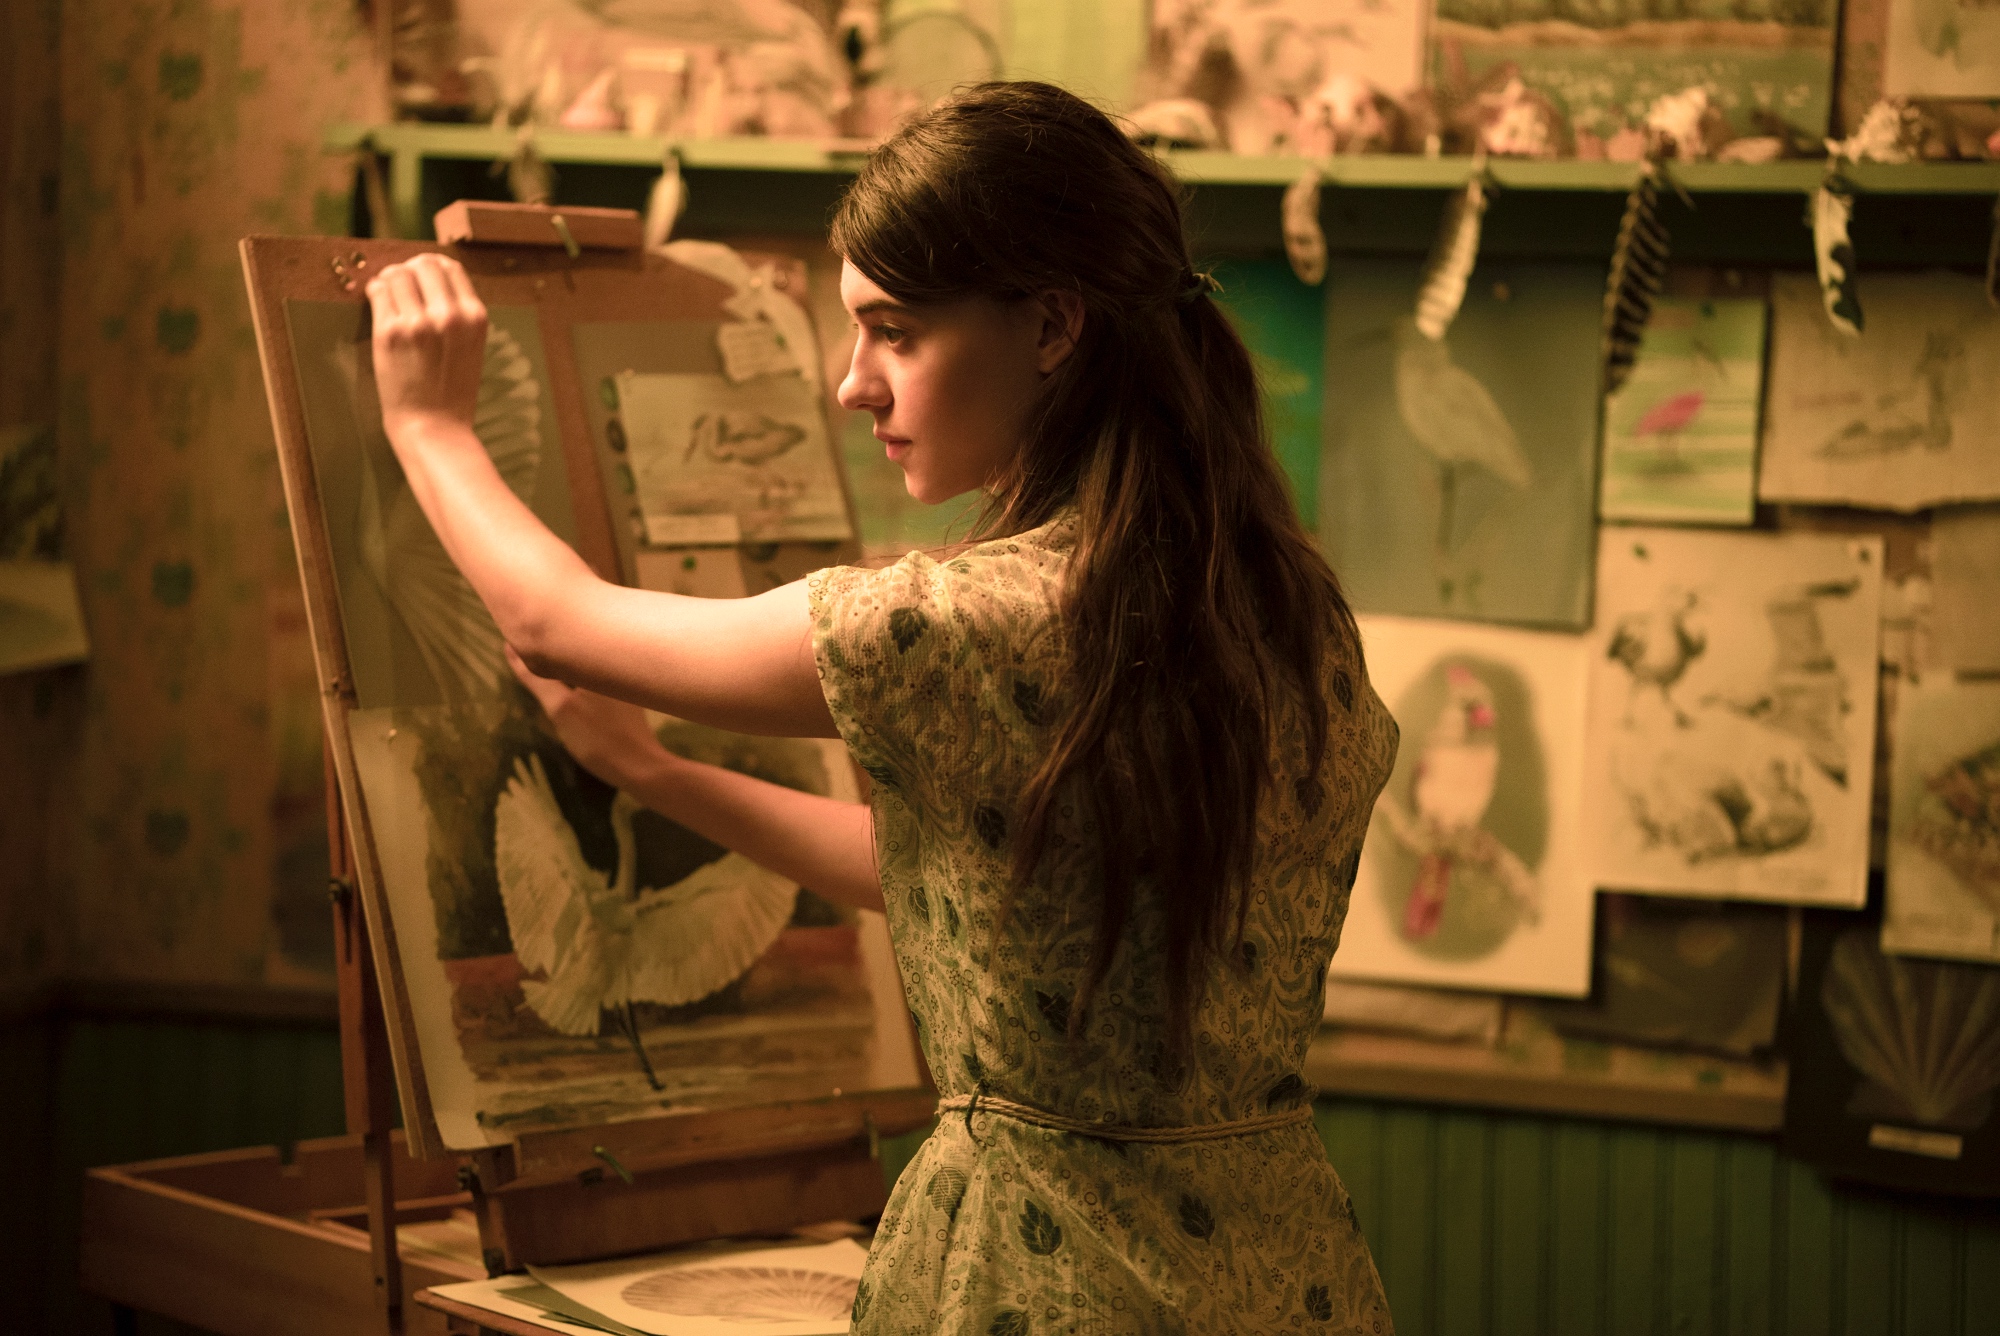 'Where the Crawdads Sing' Daisy Edgar-Jones as Kya wearing a dress looking over her shoulder while hanging up drawings